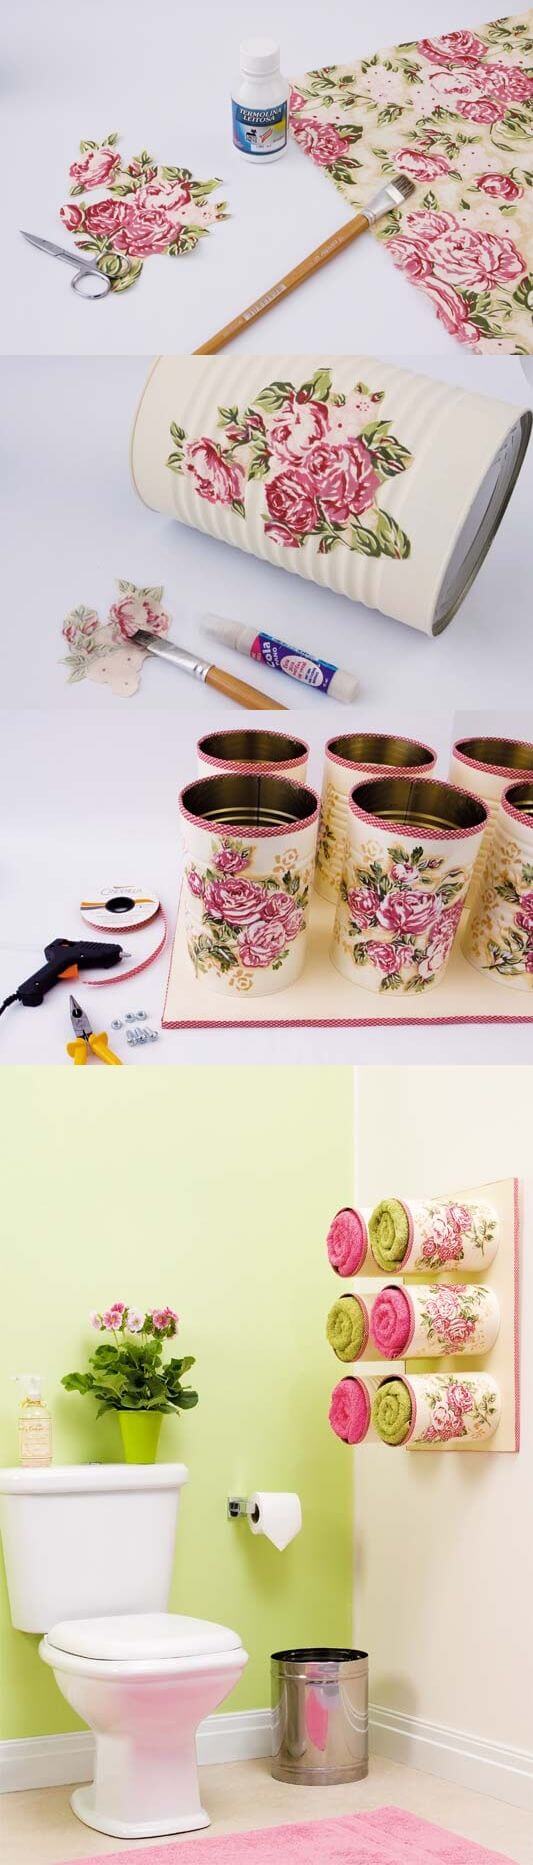 Posey-Chic Handpainted Tin Containers